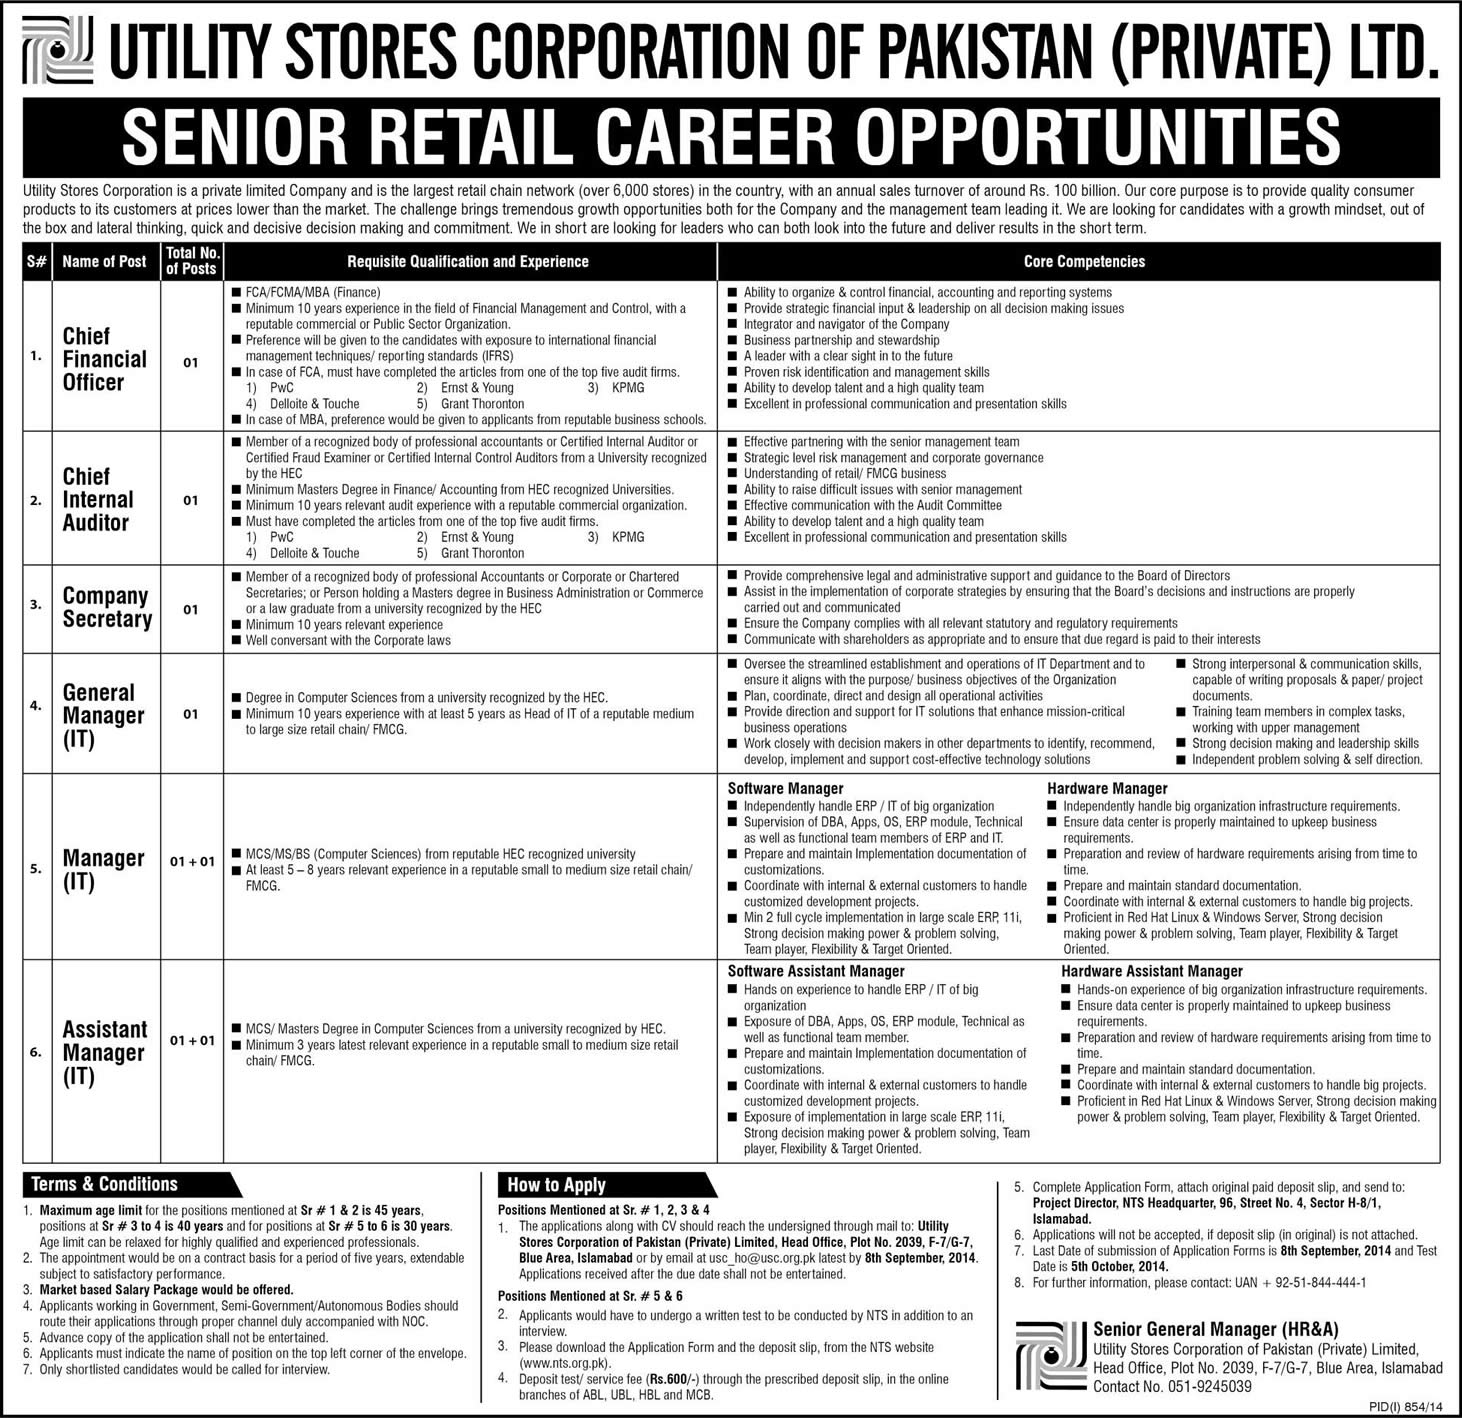 Utility Stores Corporation Jobs 2014 August for Accounting / IT Managers & Company Secretary